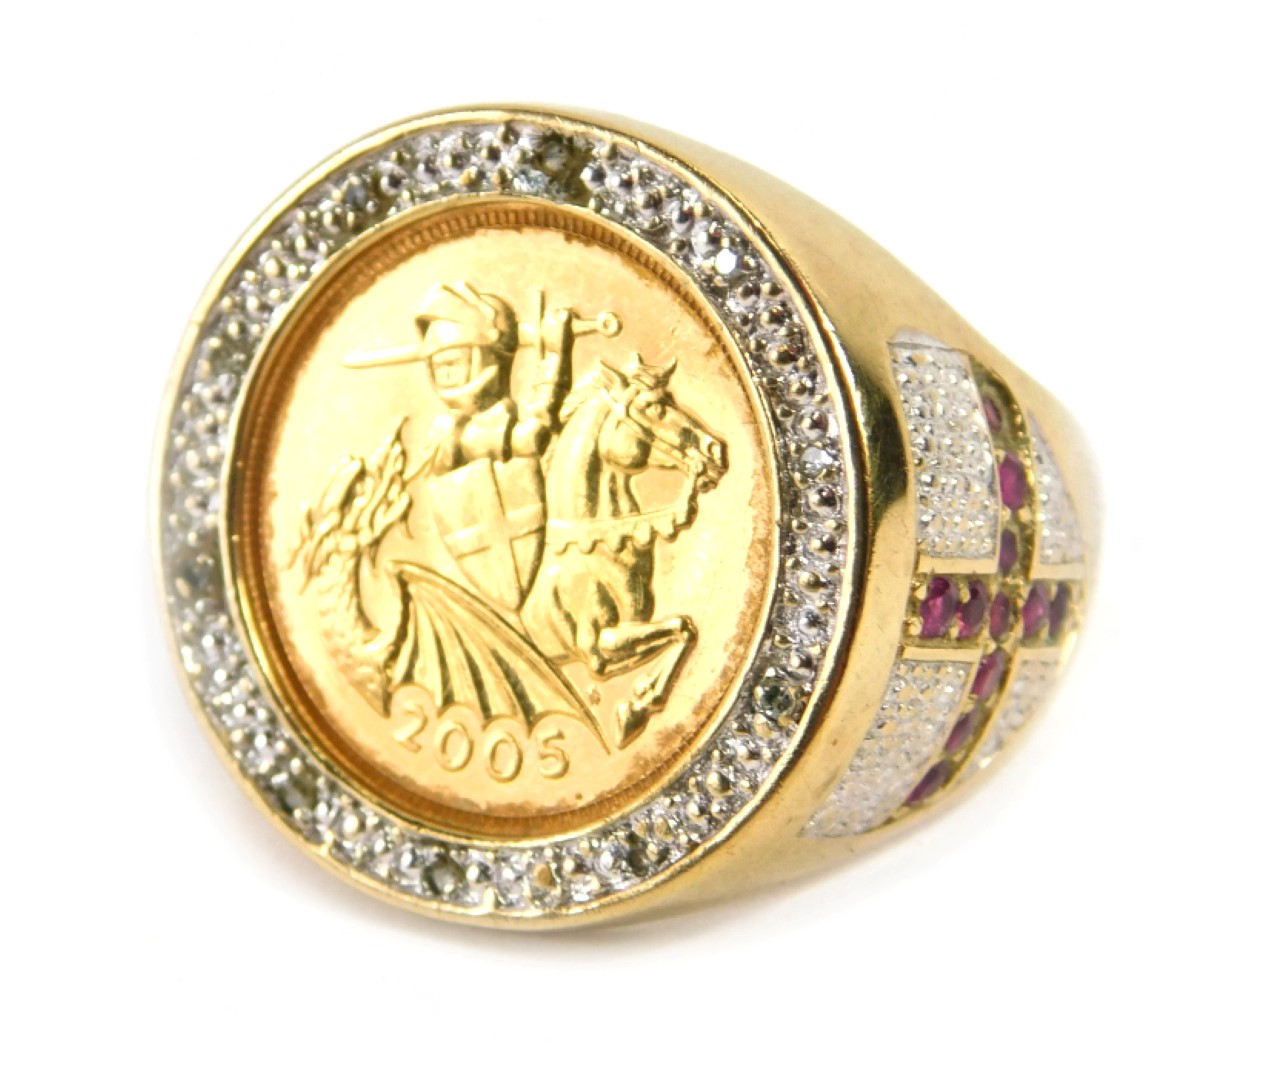 A Queen Elizabeth II St George half gold sovereign ring, the sovereign dated 2005 with warrior on ho